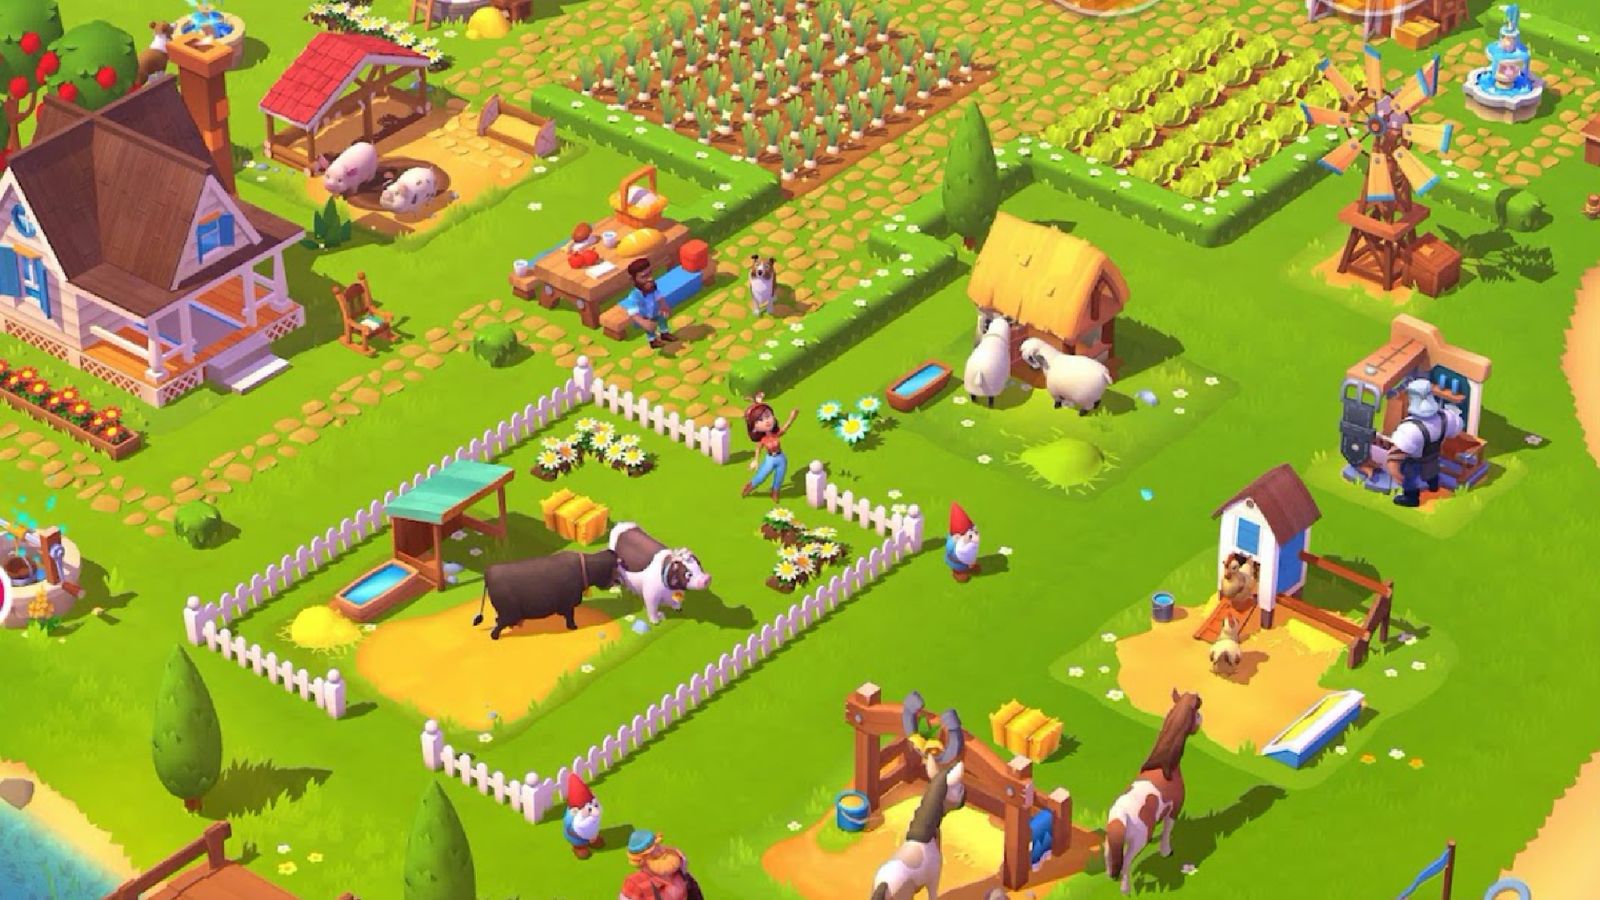 Farmville is set to be one of the best Android farming games when it launches soon.